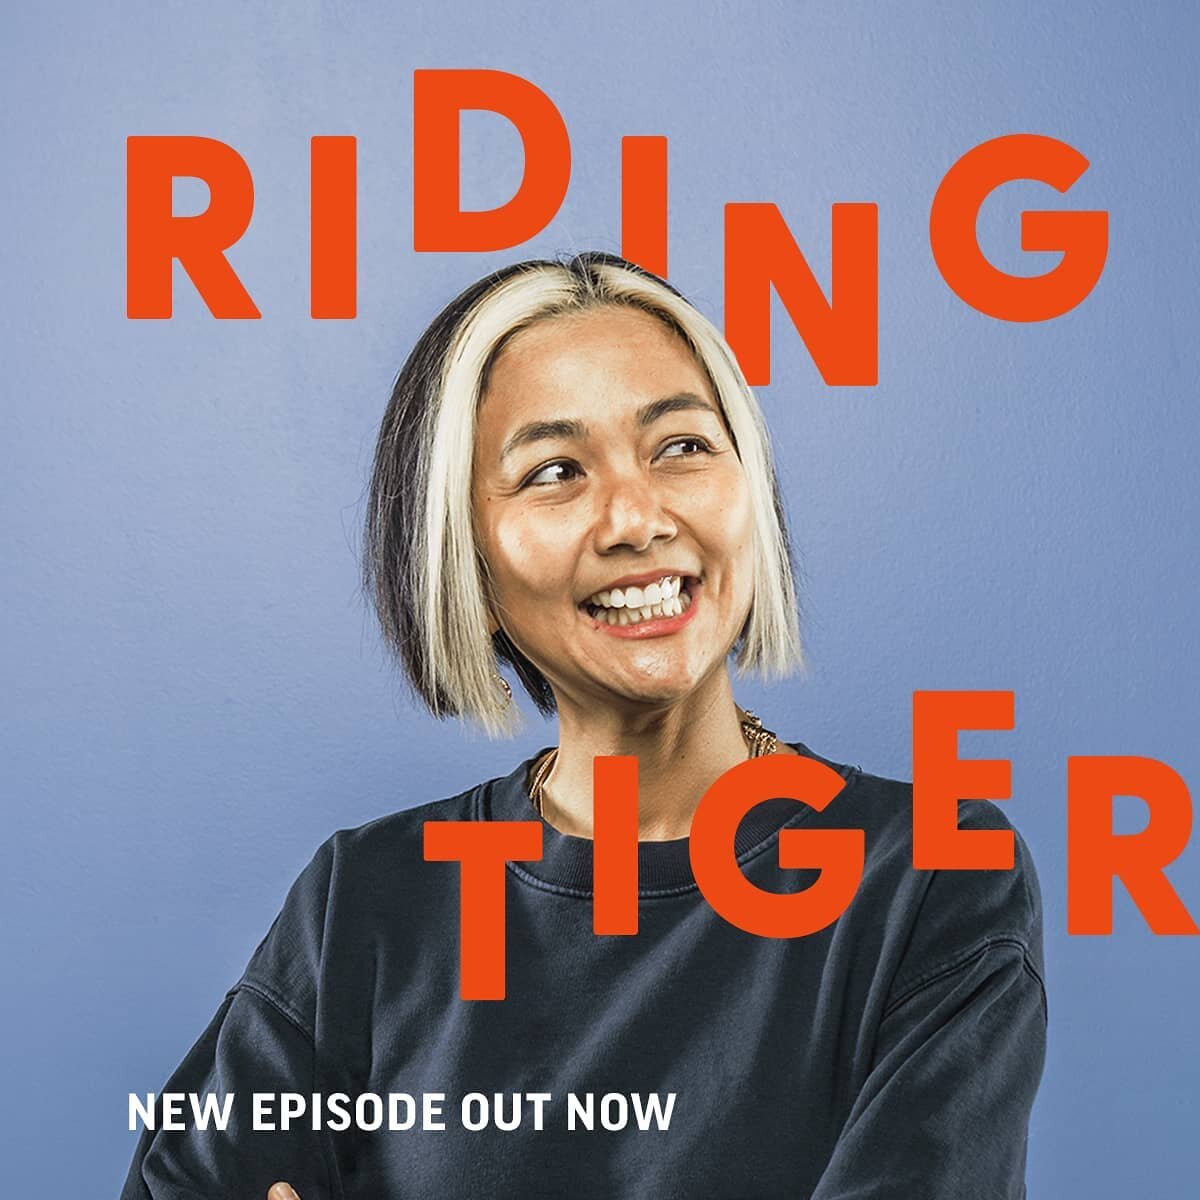 It's finally here. Be sure to tune in our 1st episode. Available on our website link in bio. Also available now on spotify. If you like what we do. Subscribe to our show, and share. 🐯🍩🔥🔥🔥#ridingtigerpodcast #nongskhaomangai #nongkmg #bluestardon